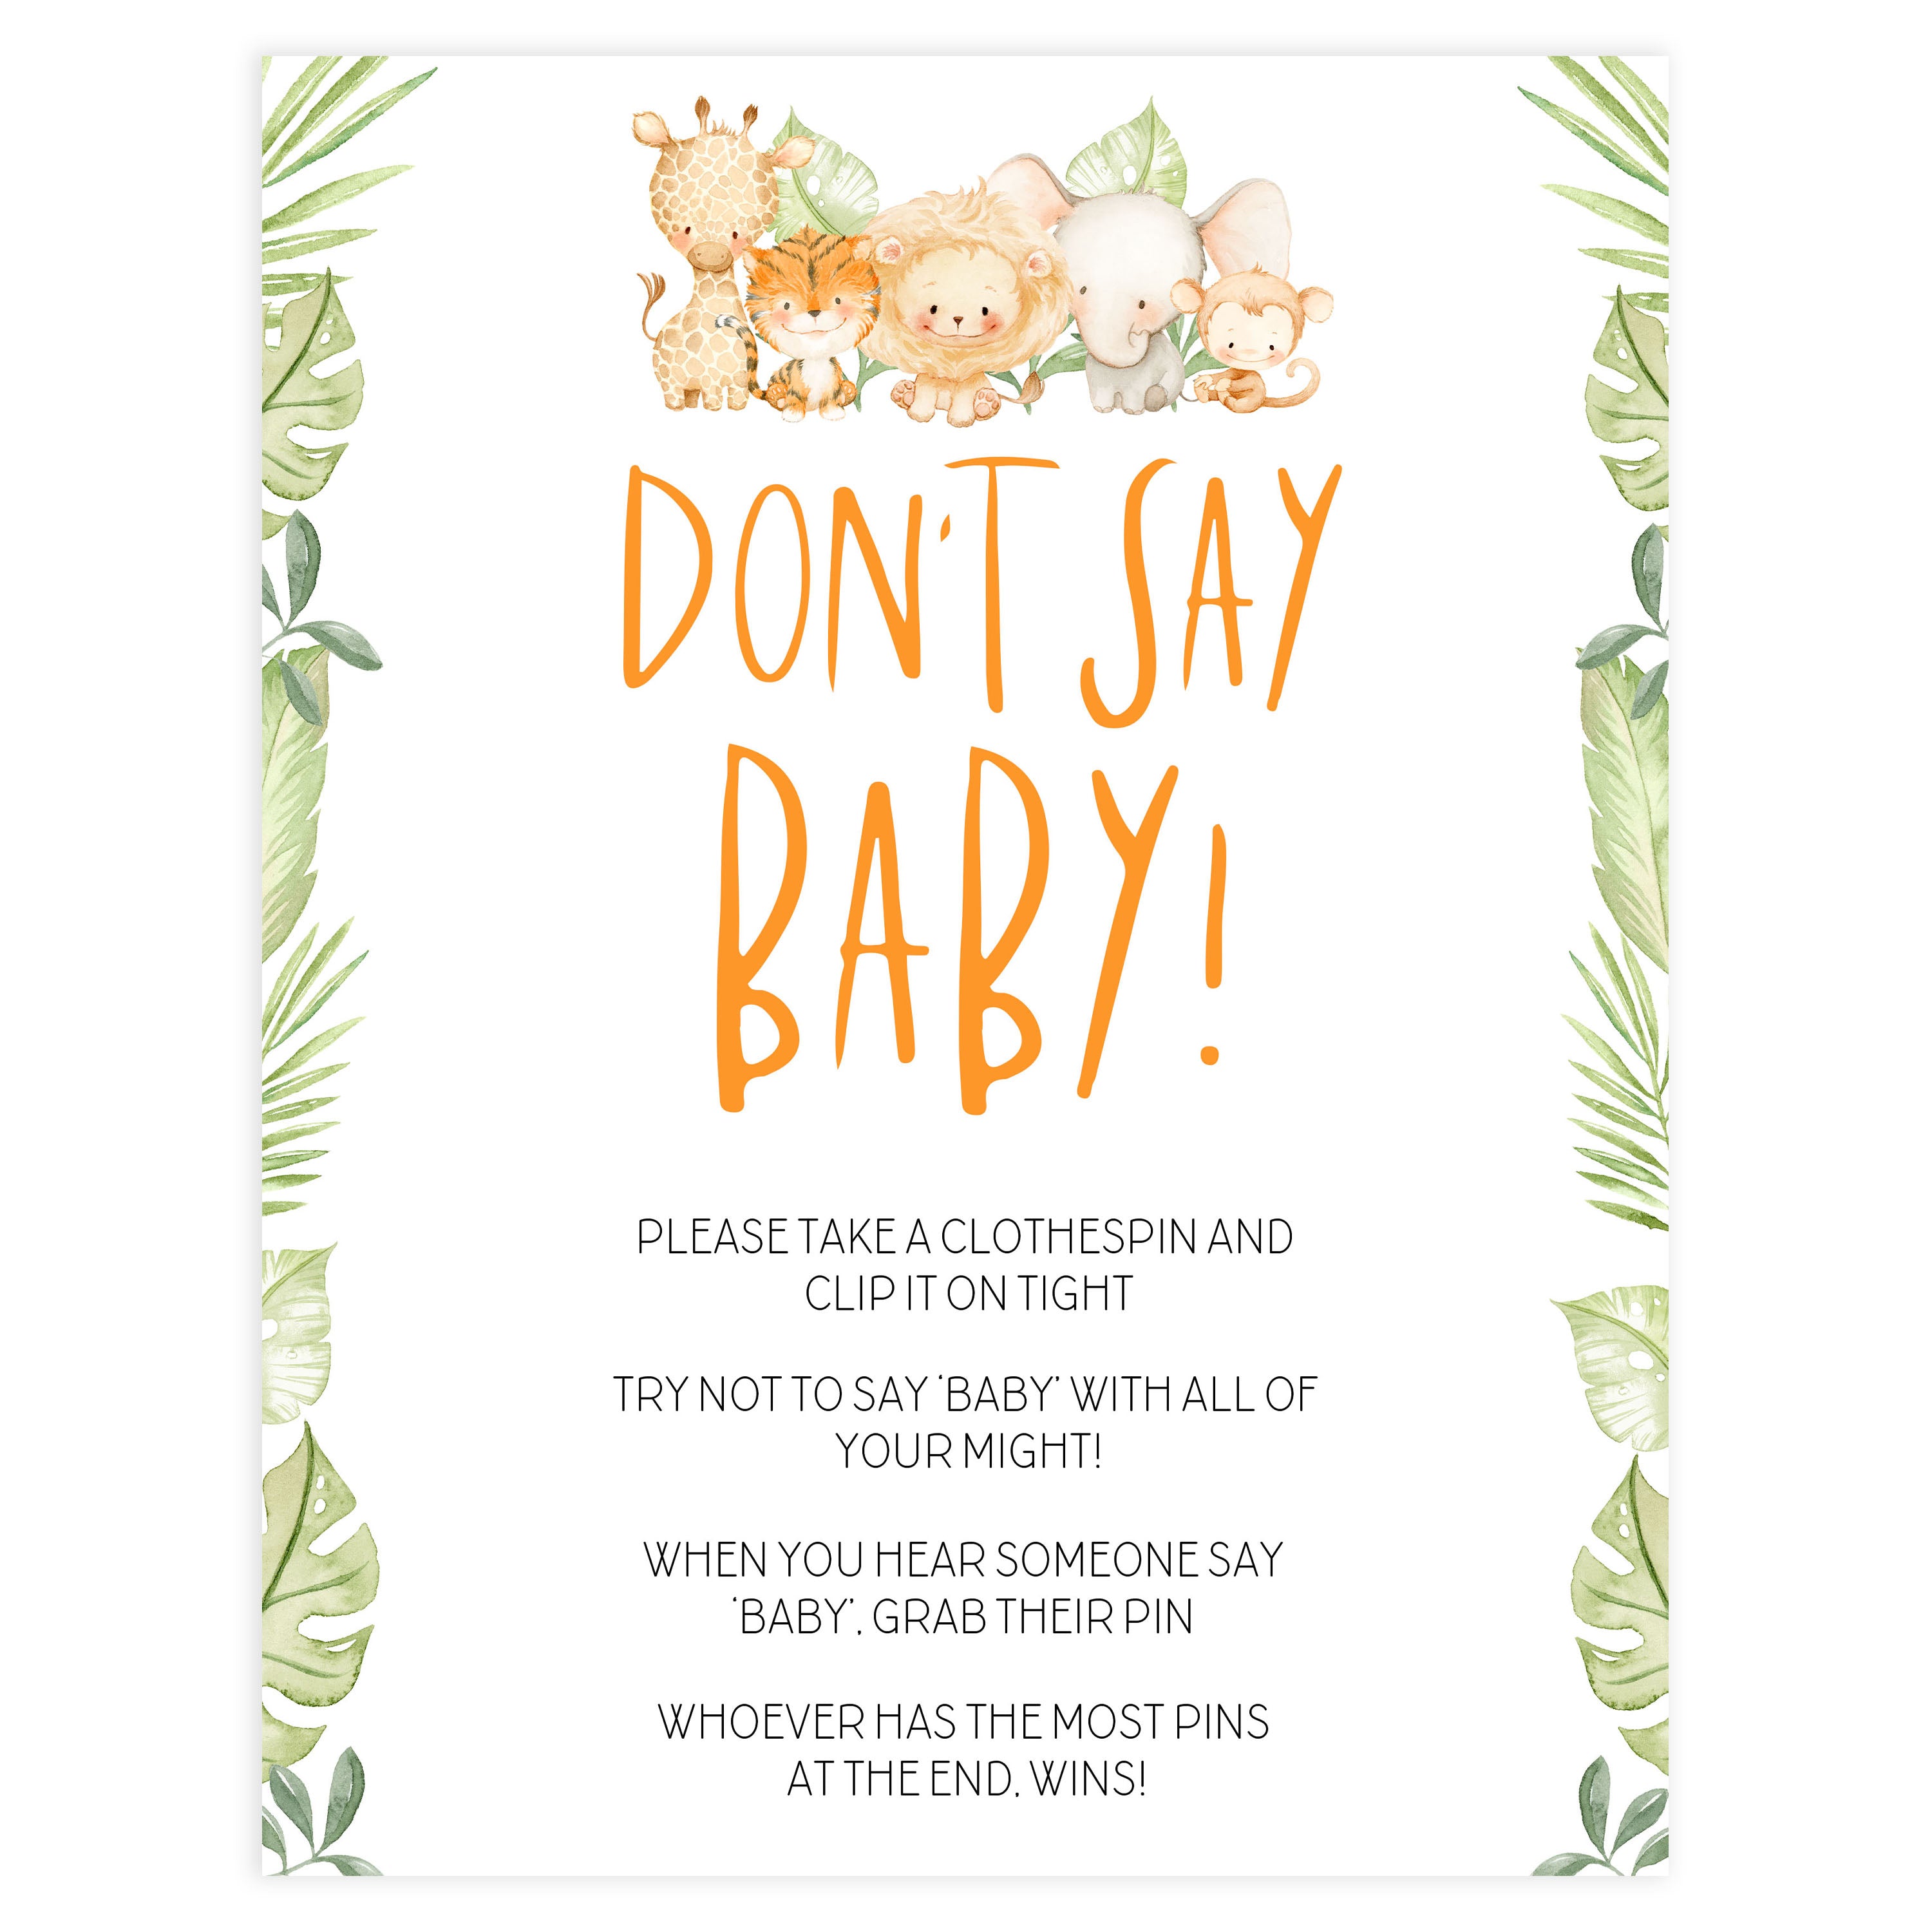 dont say baby game, Printable baby shower games, safari animals baby games, baby shower games, fun baby shower ideas, top baby shower ideas, safari animals baby shower, baby shower games, fun baby shower ideas